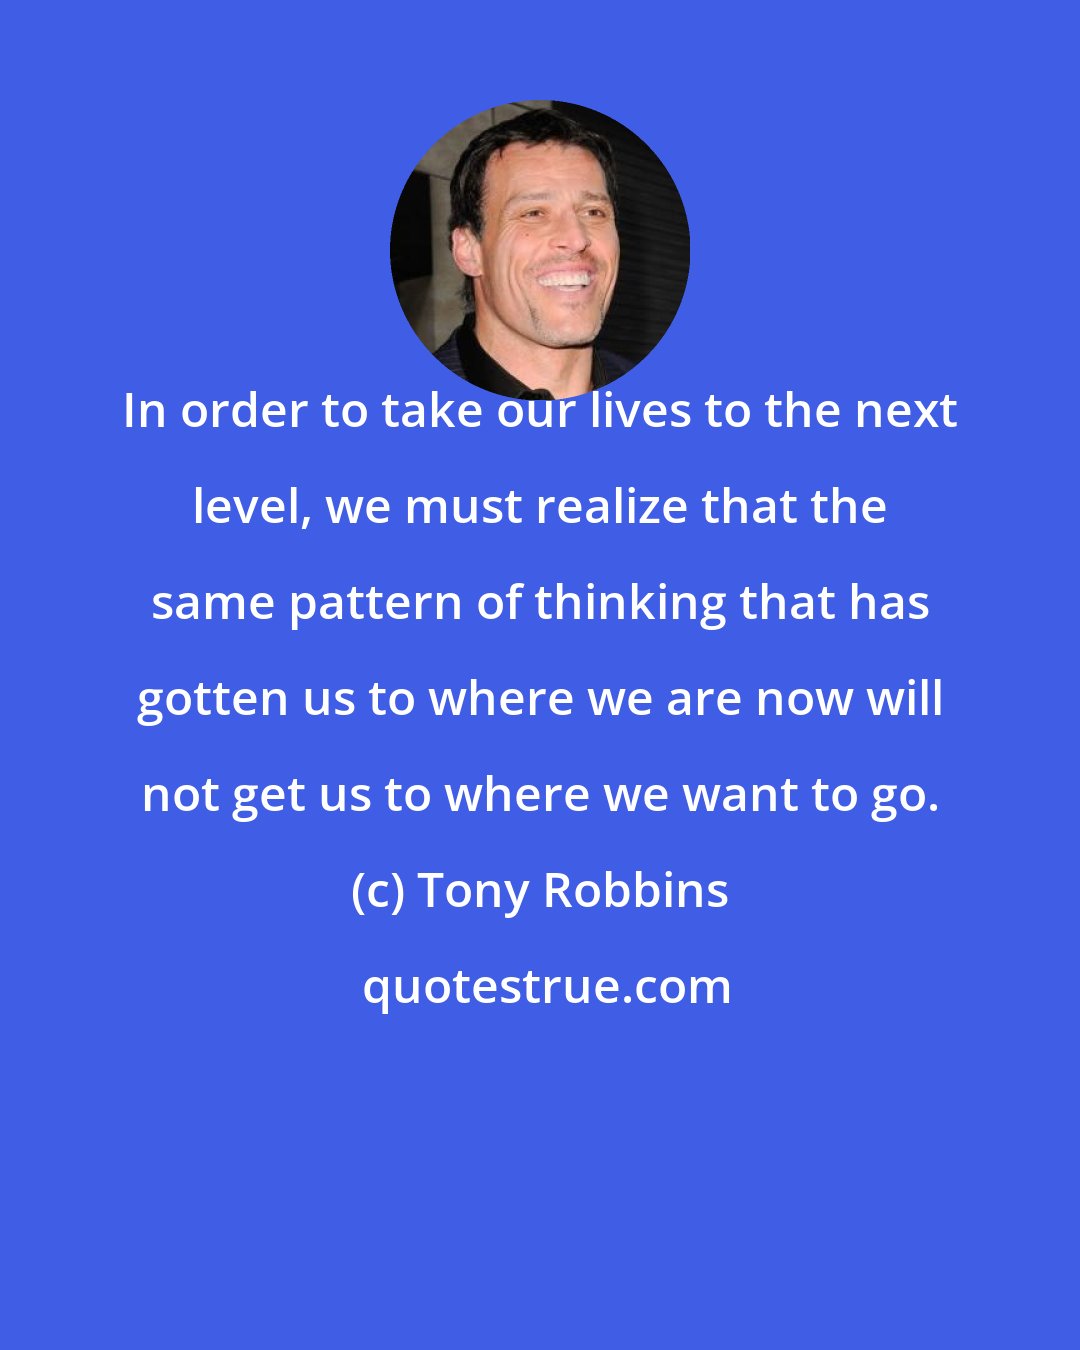 Tony Robbins: In order to take our lives to the next level, we must realize that the same pattern of thinking that has gotten us to where we are now will not get us to where we want to go.